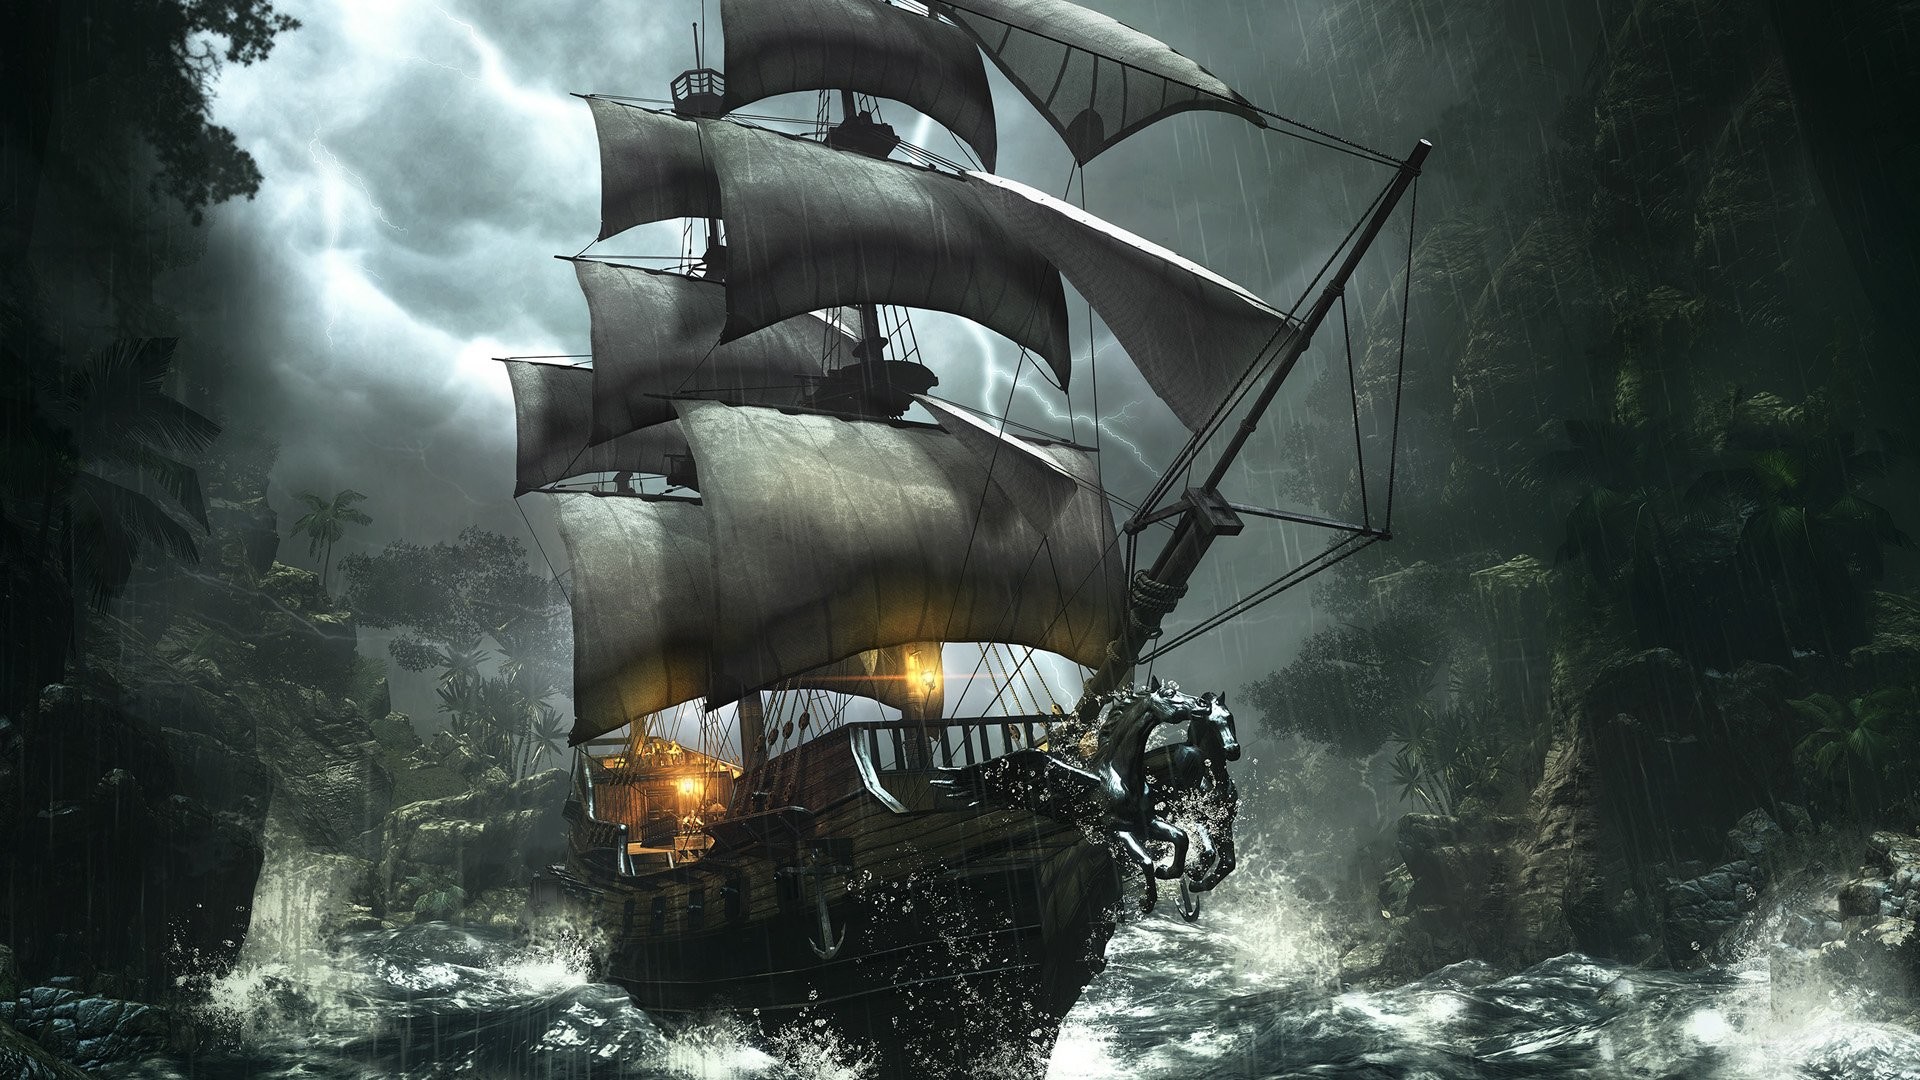 Pirate Ships Wallpaper Images